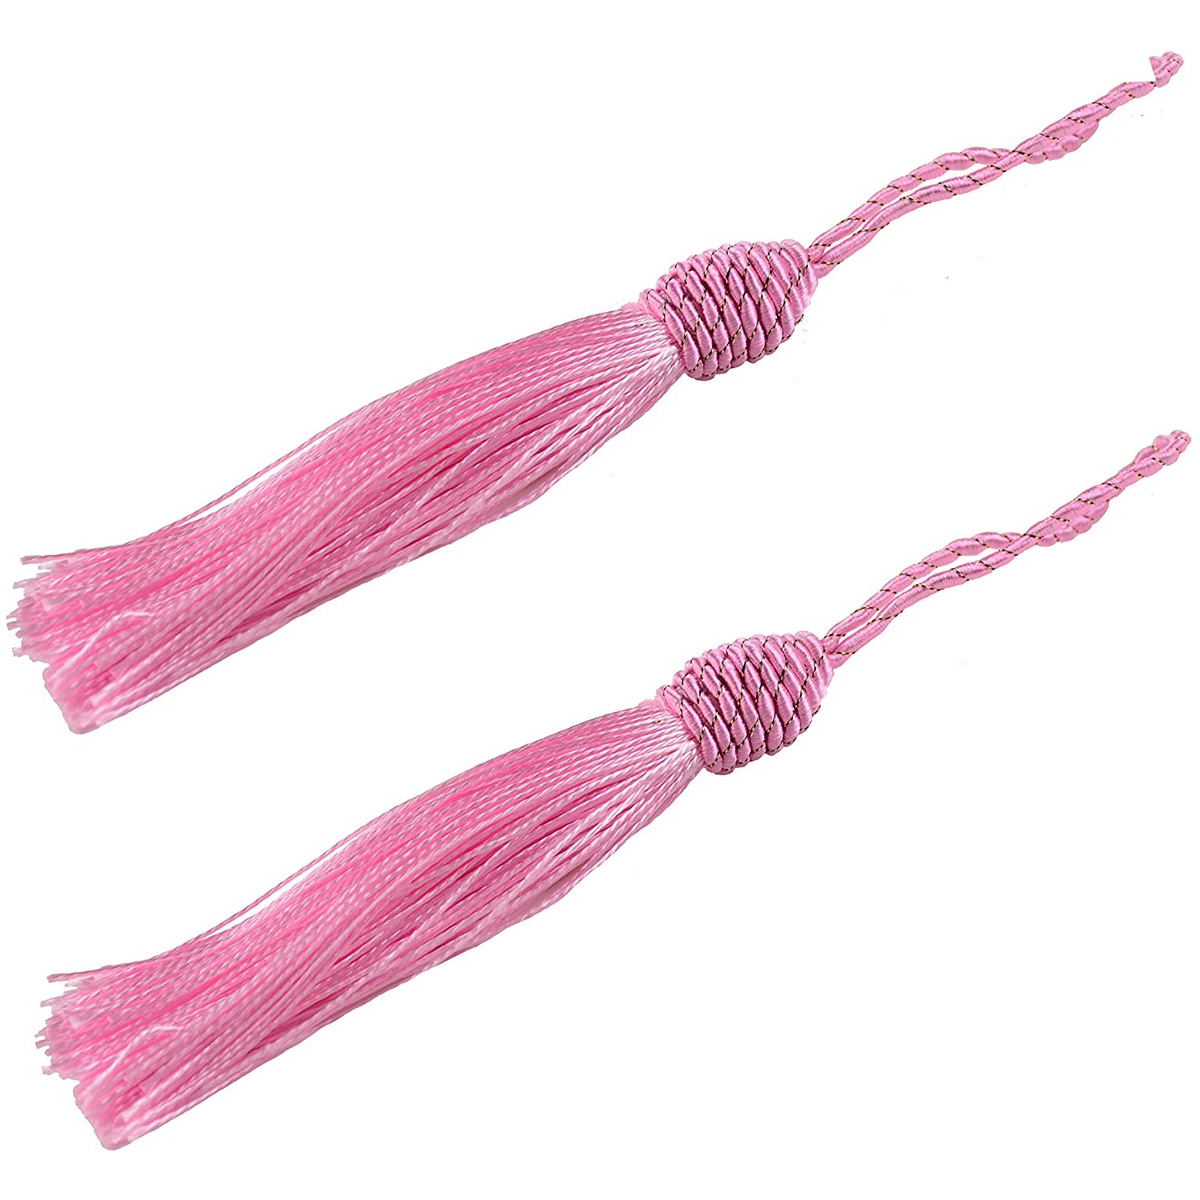 6 Inch Silky Floss Bookmark Tassels with 2-Inch Cord Loop and Small Chinese Bookmarks pink color